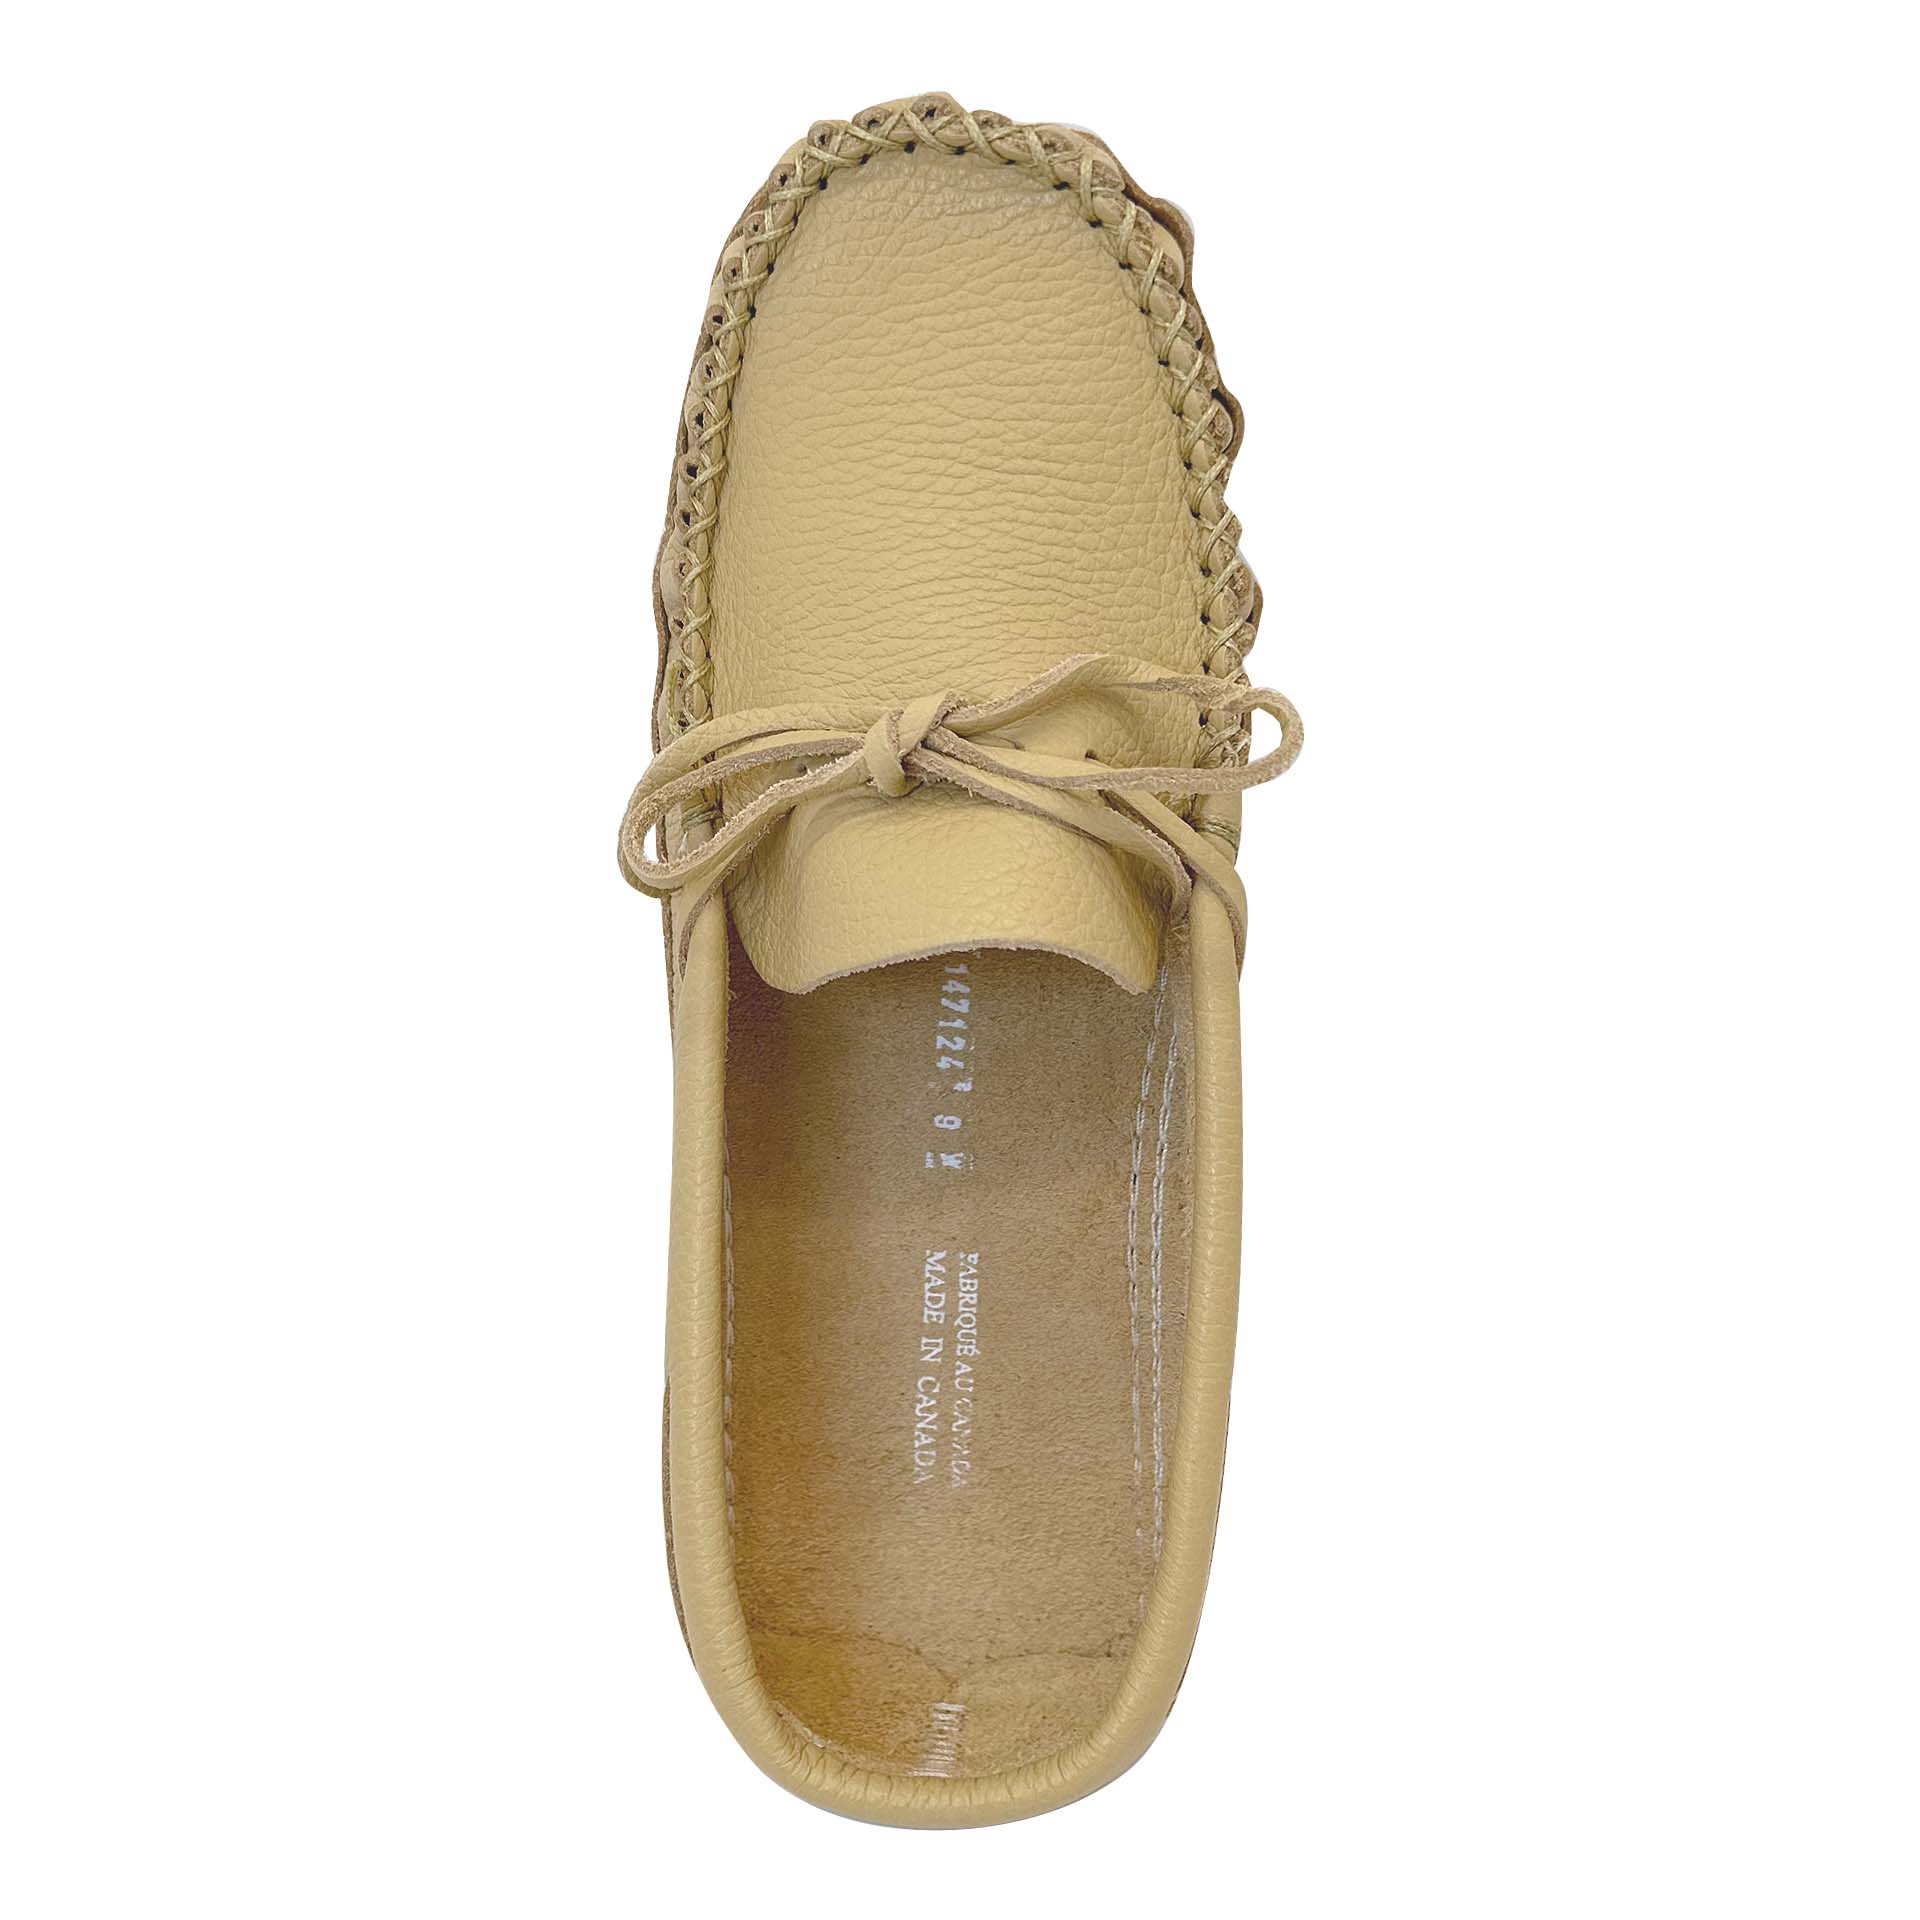 Men's Earthing Moccasins Wide Leather (Final Clearance)